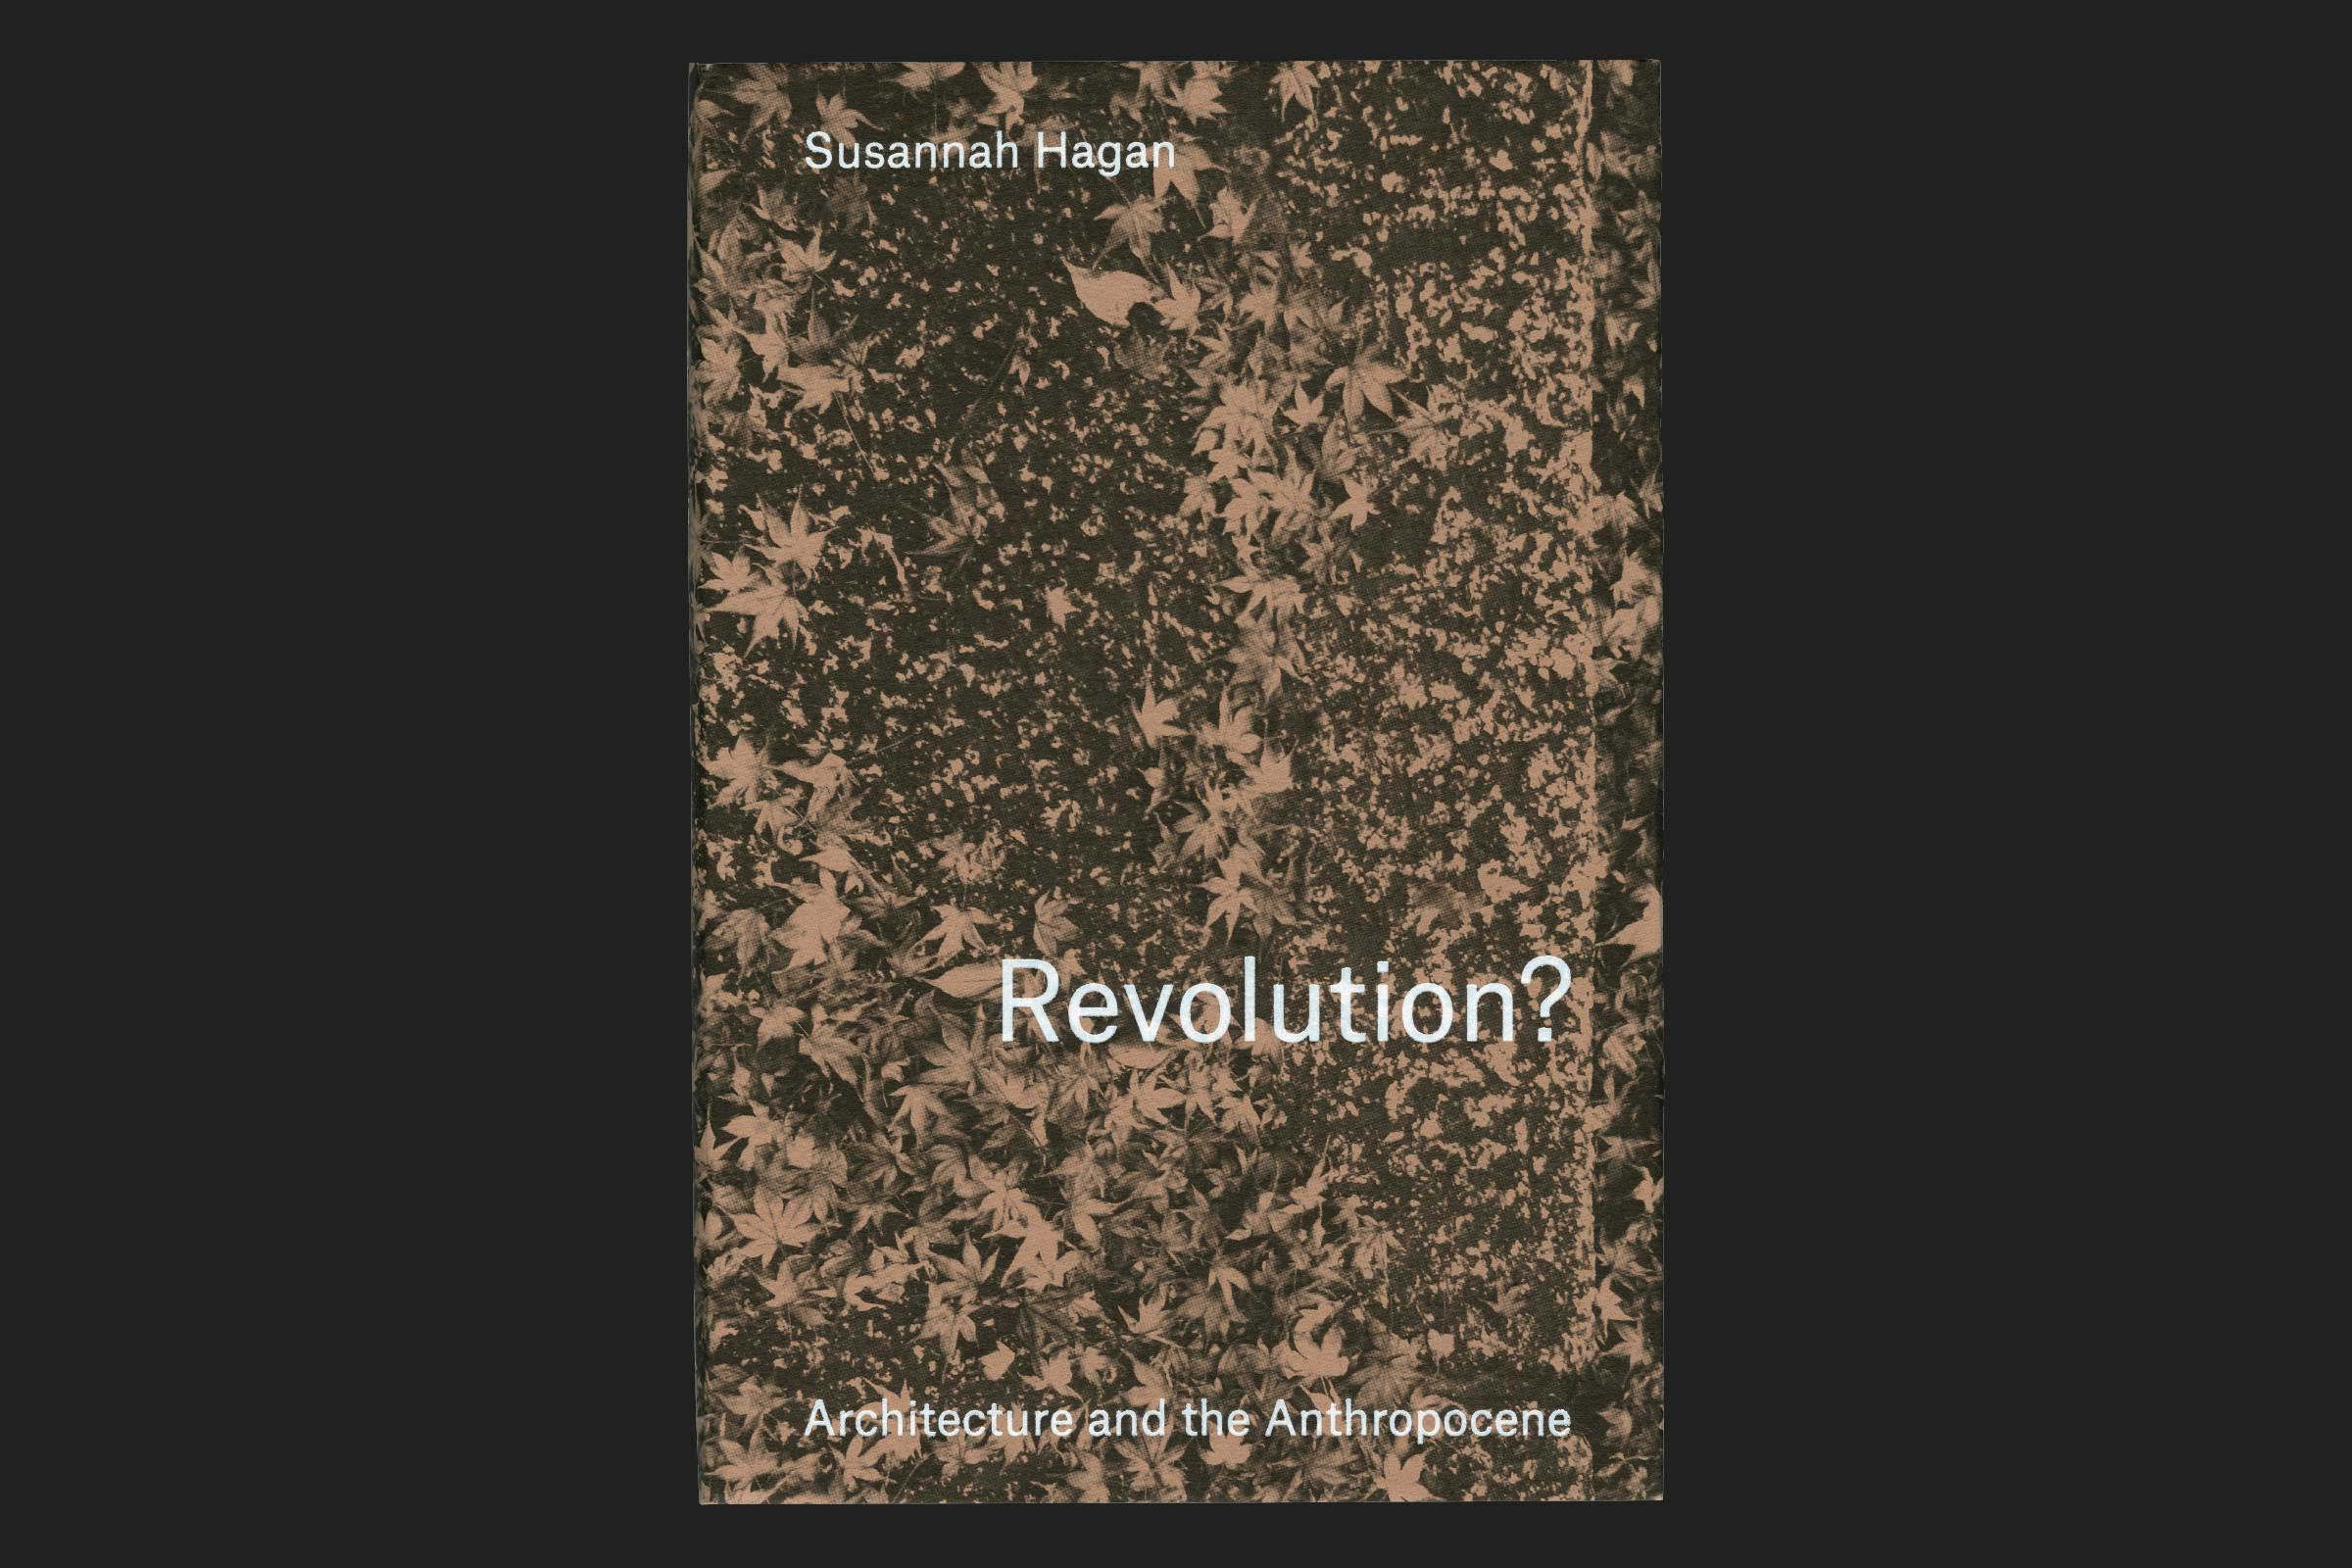 Revolutions?, Revolutions? Architecture in the Anthropocene, Lund Humphries, Publication, Graphic Design by Wolfe Hall